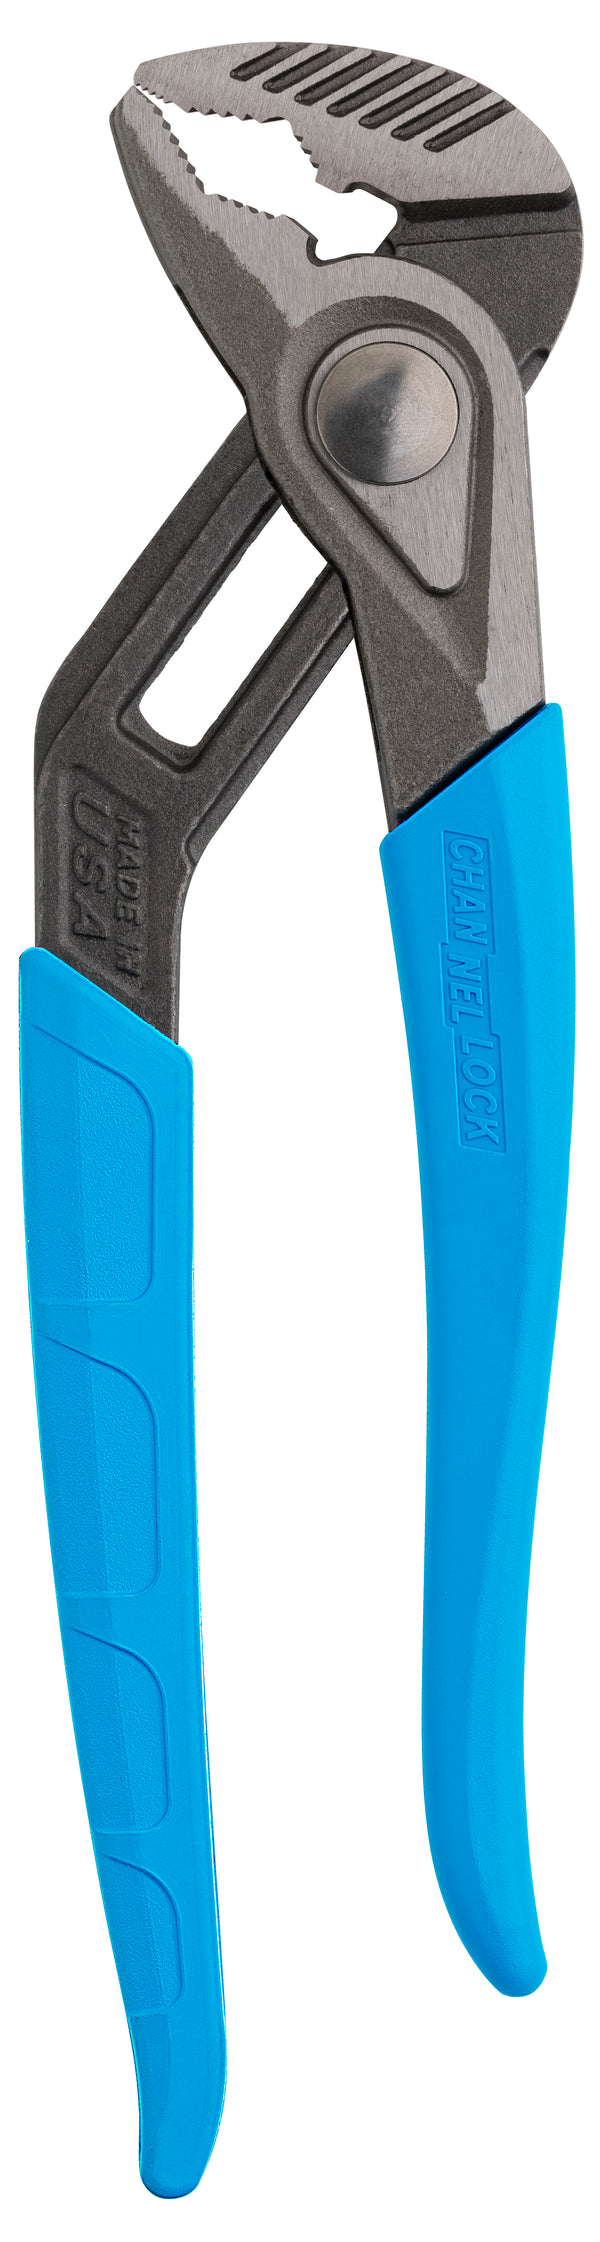 Channellock 442X 12-INCH SPEEDGRIP™ V-JAW TONGUE & GROOVE PLIERS